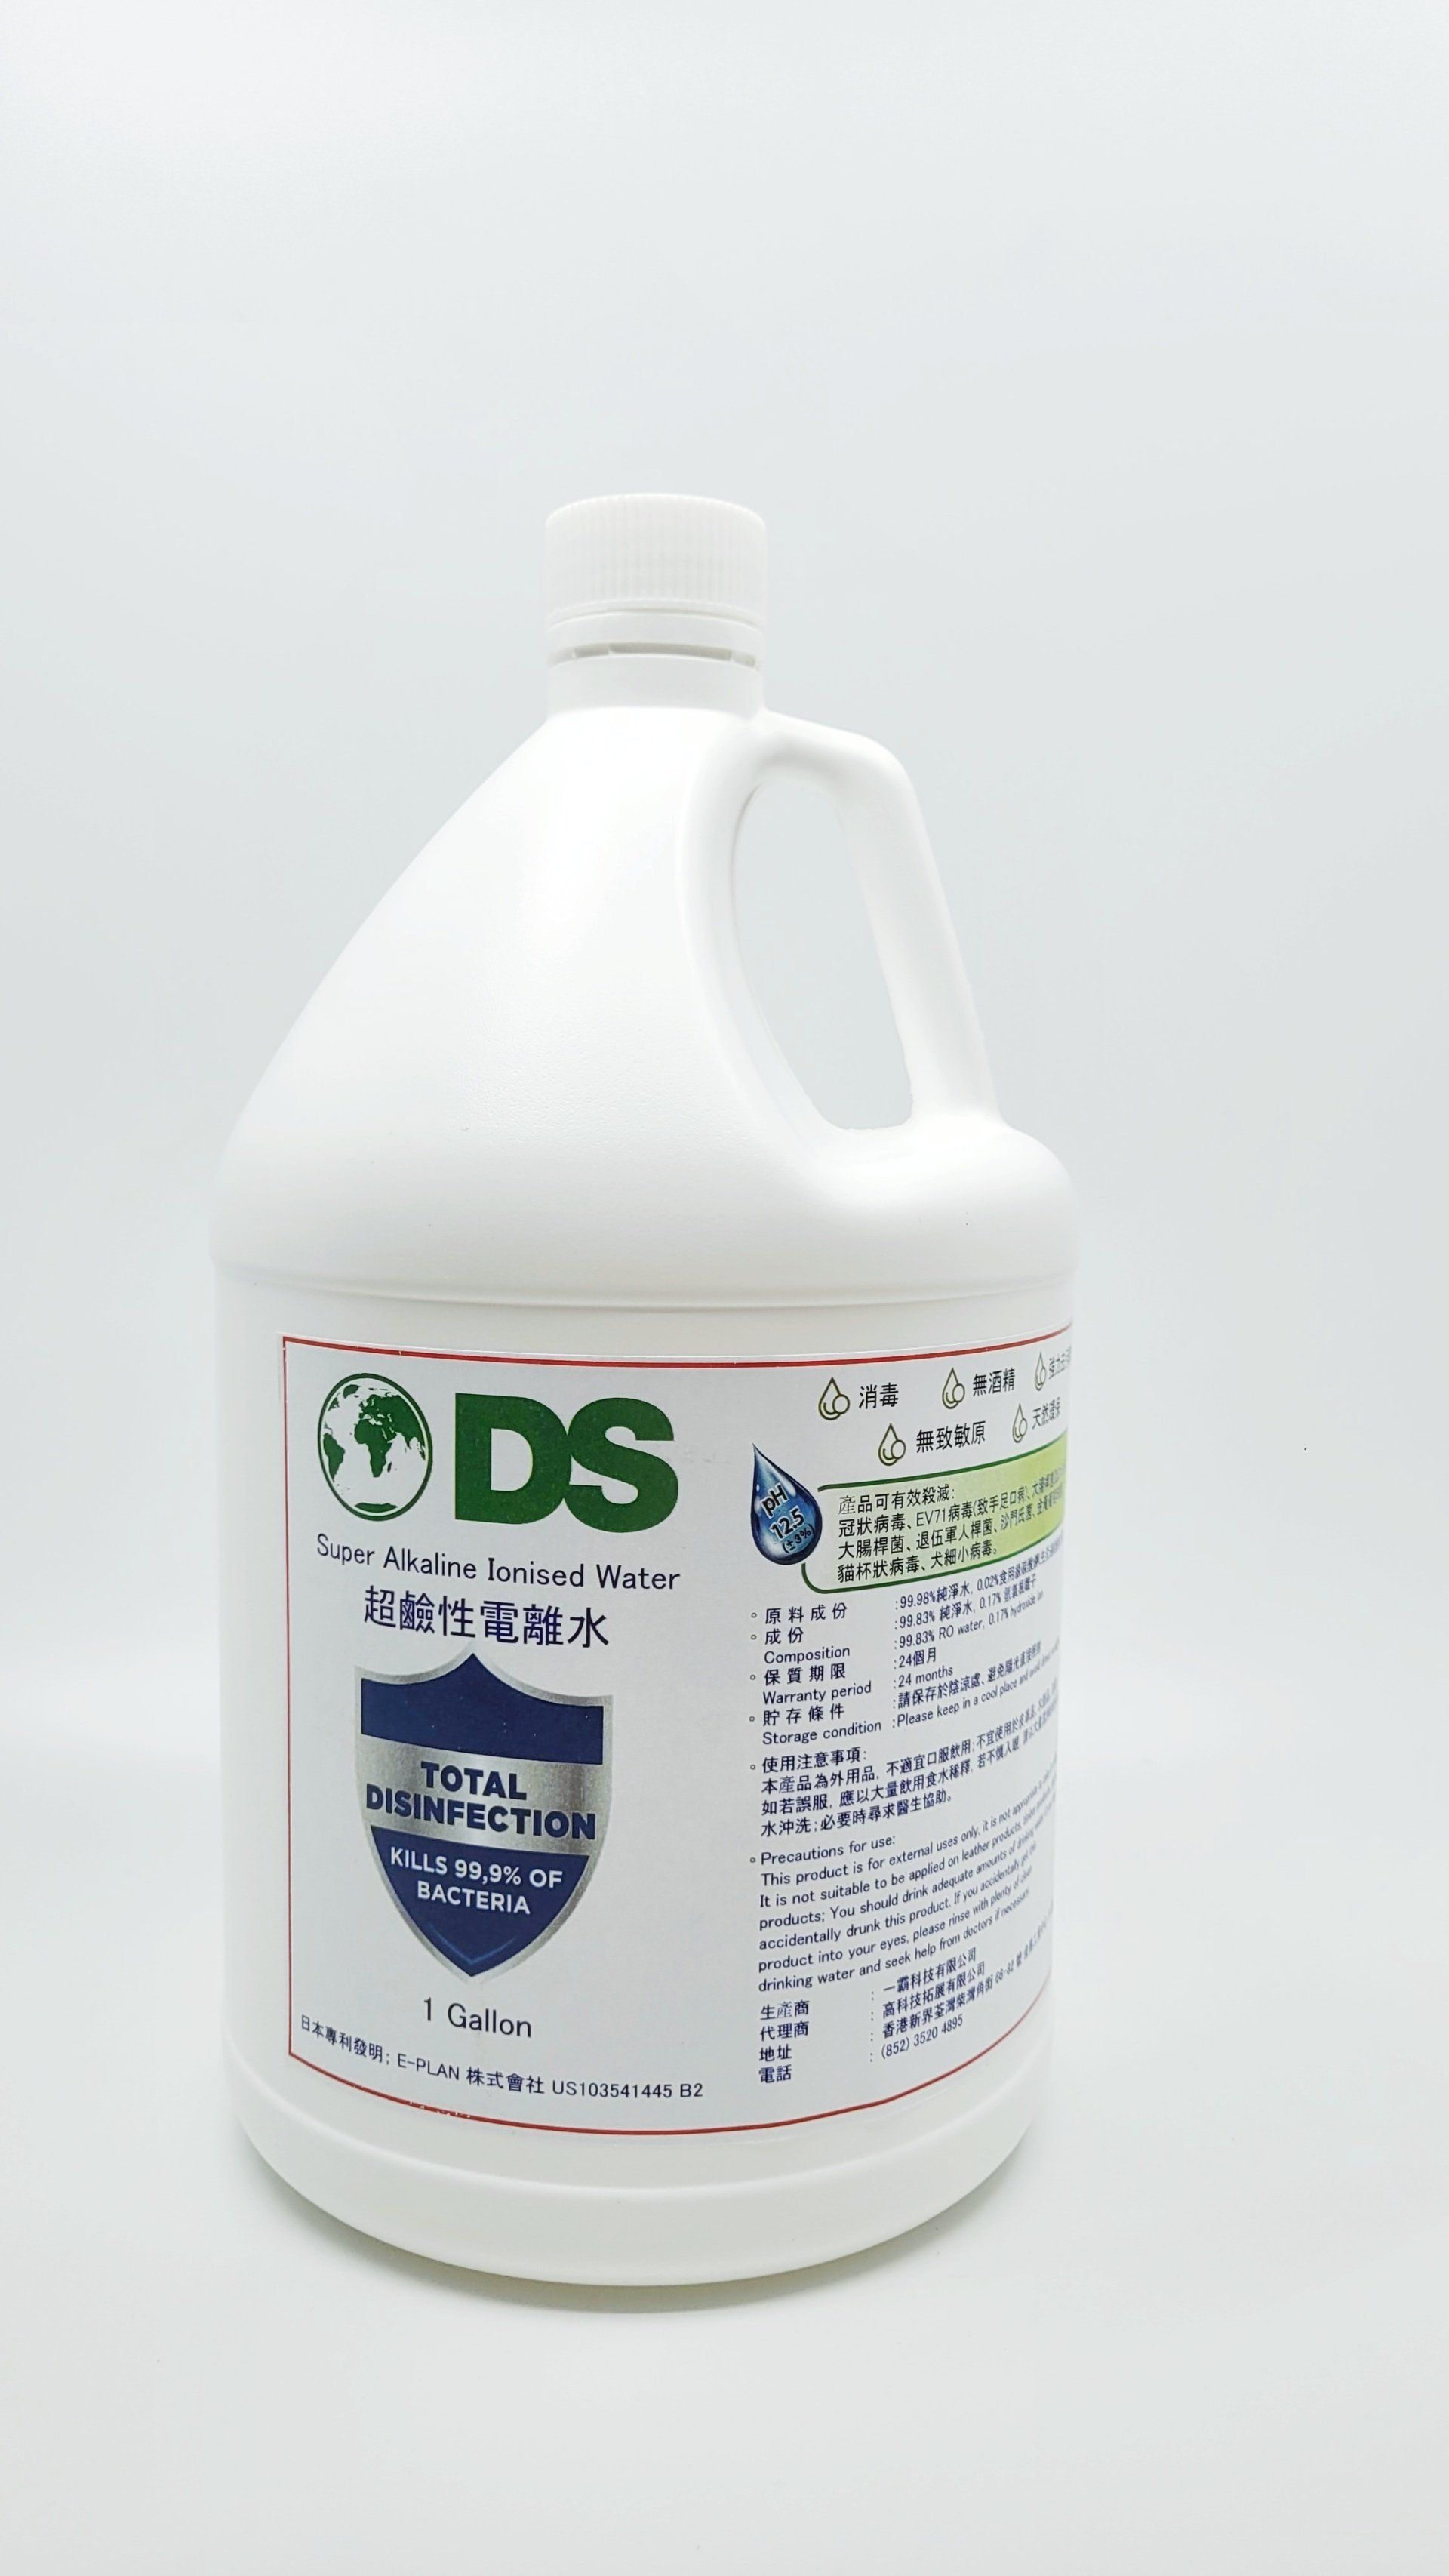 Product name: DS Super Alkaline Ionized Water (SAIW)   Applications: Disinfection, cleansing, cleaning, and deodorizing Ingredients: Pure water (99.83%) Potassium hydroxide (0.17%)